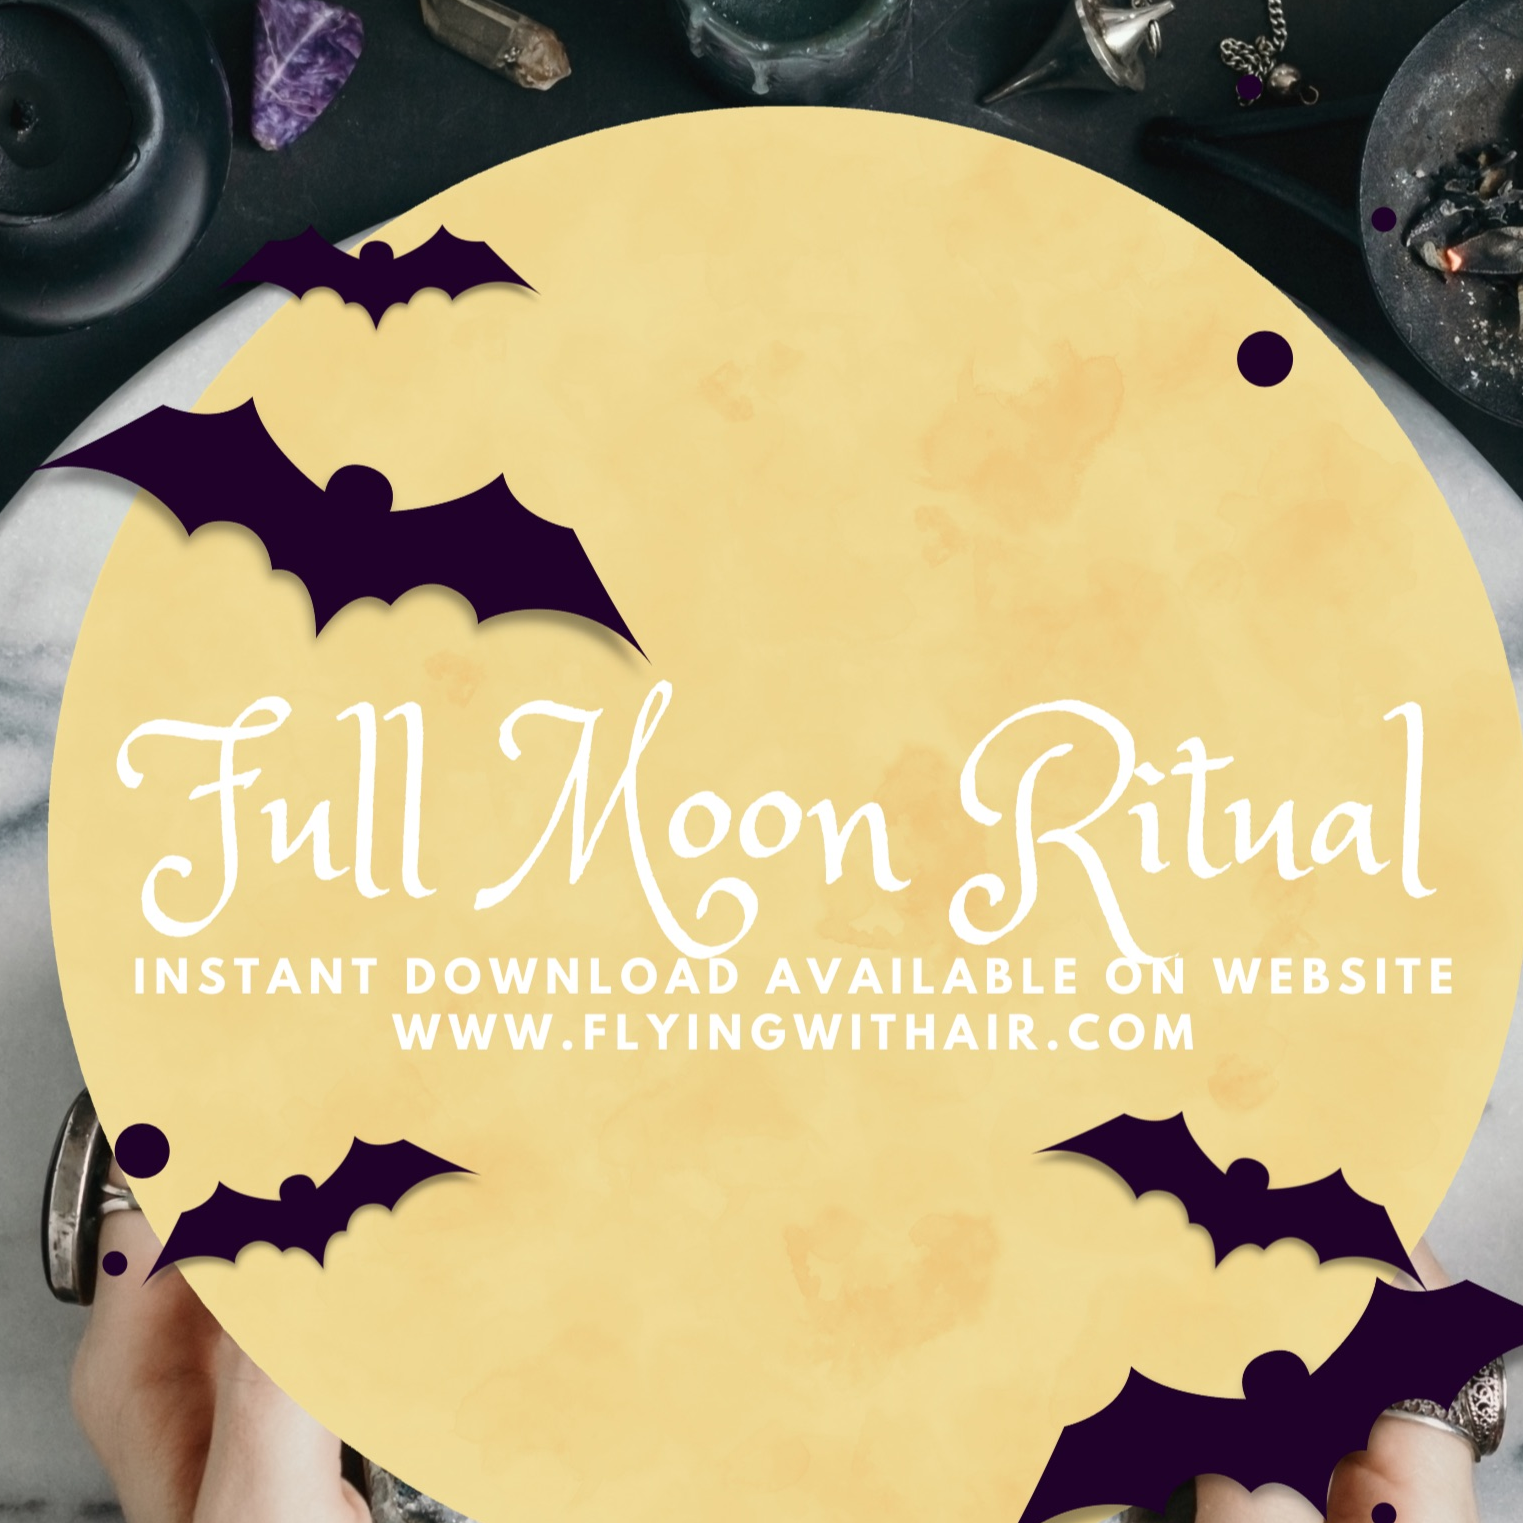 full moon witch ritual instant download